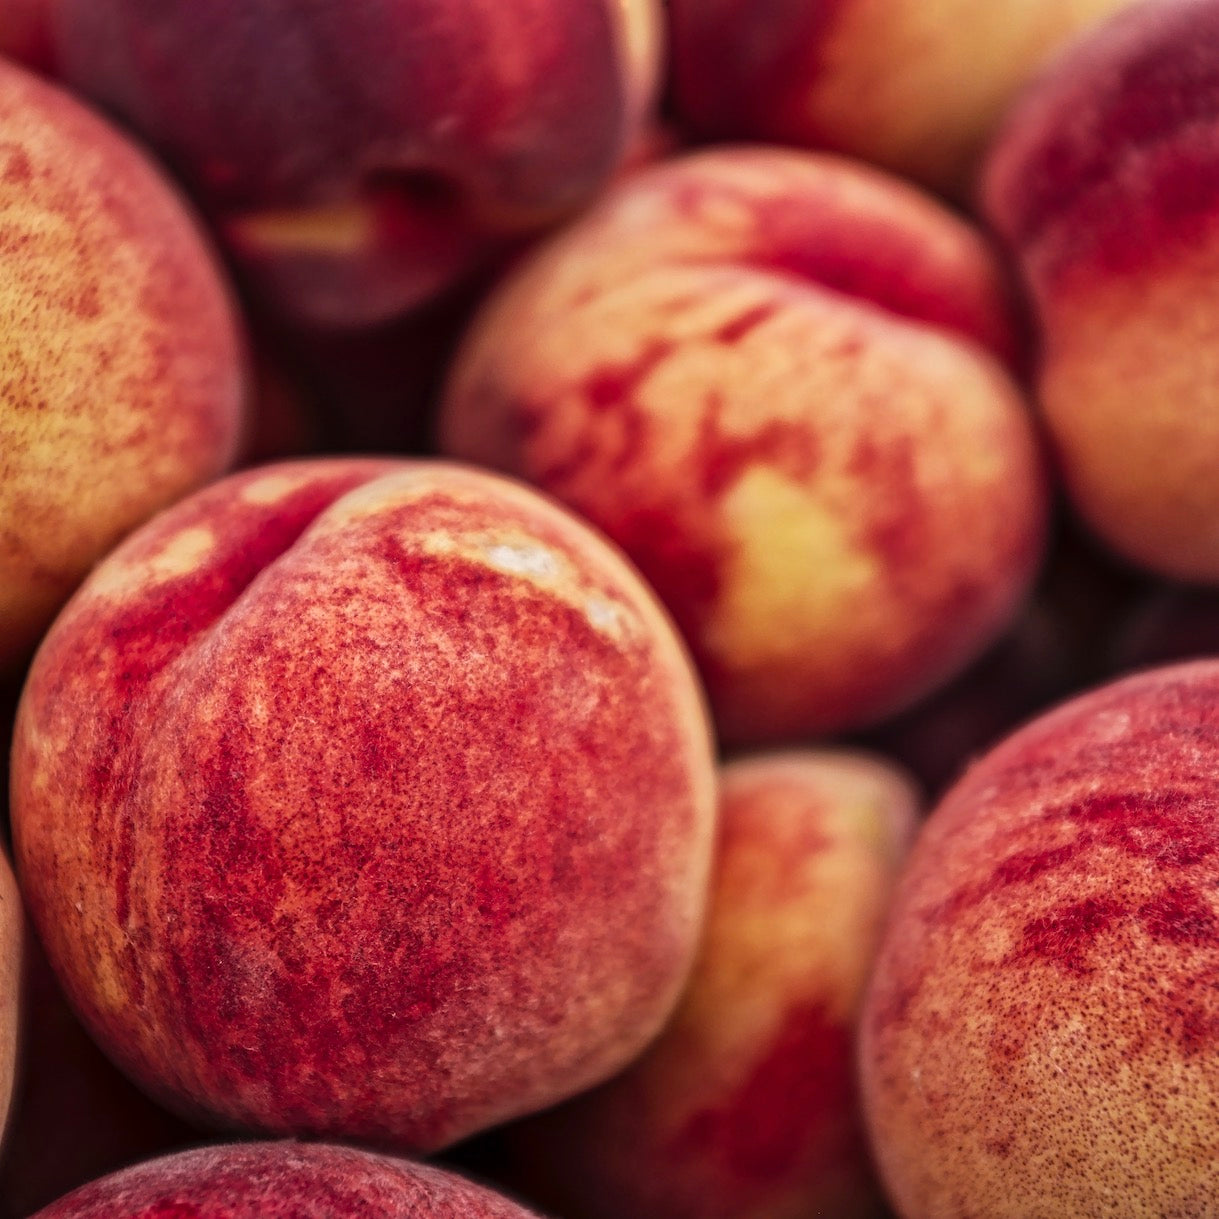 Shop White Peach & Fruits in Singapore - The New Grocer